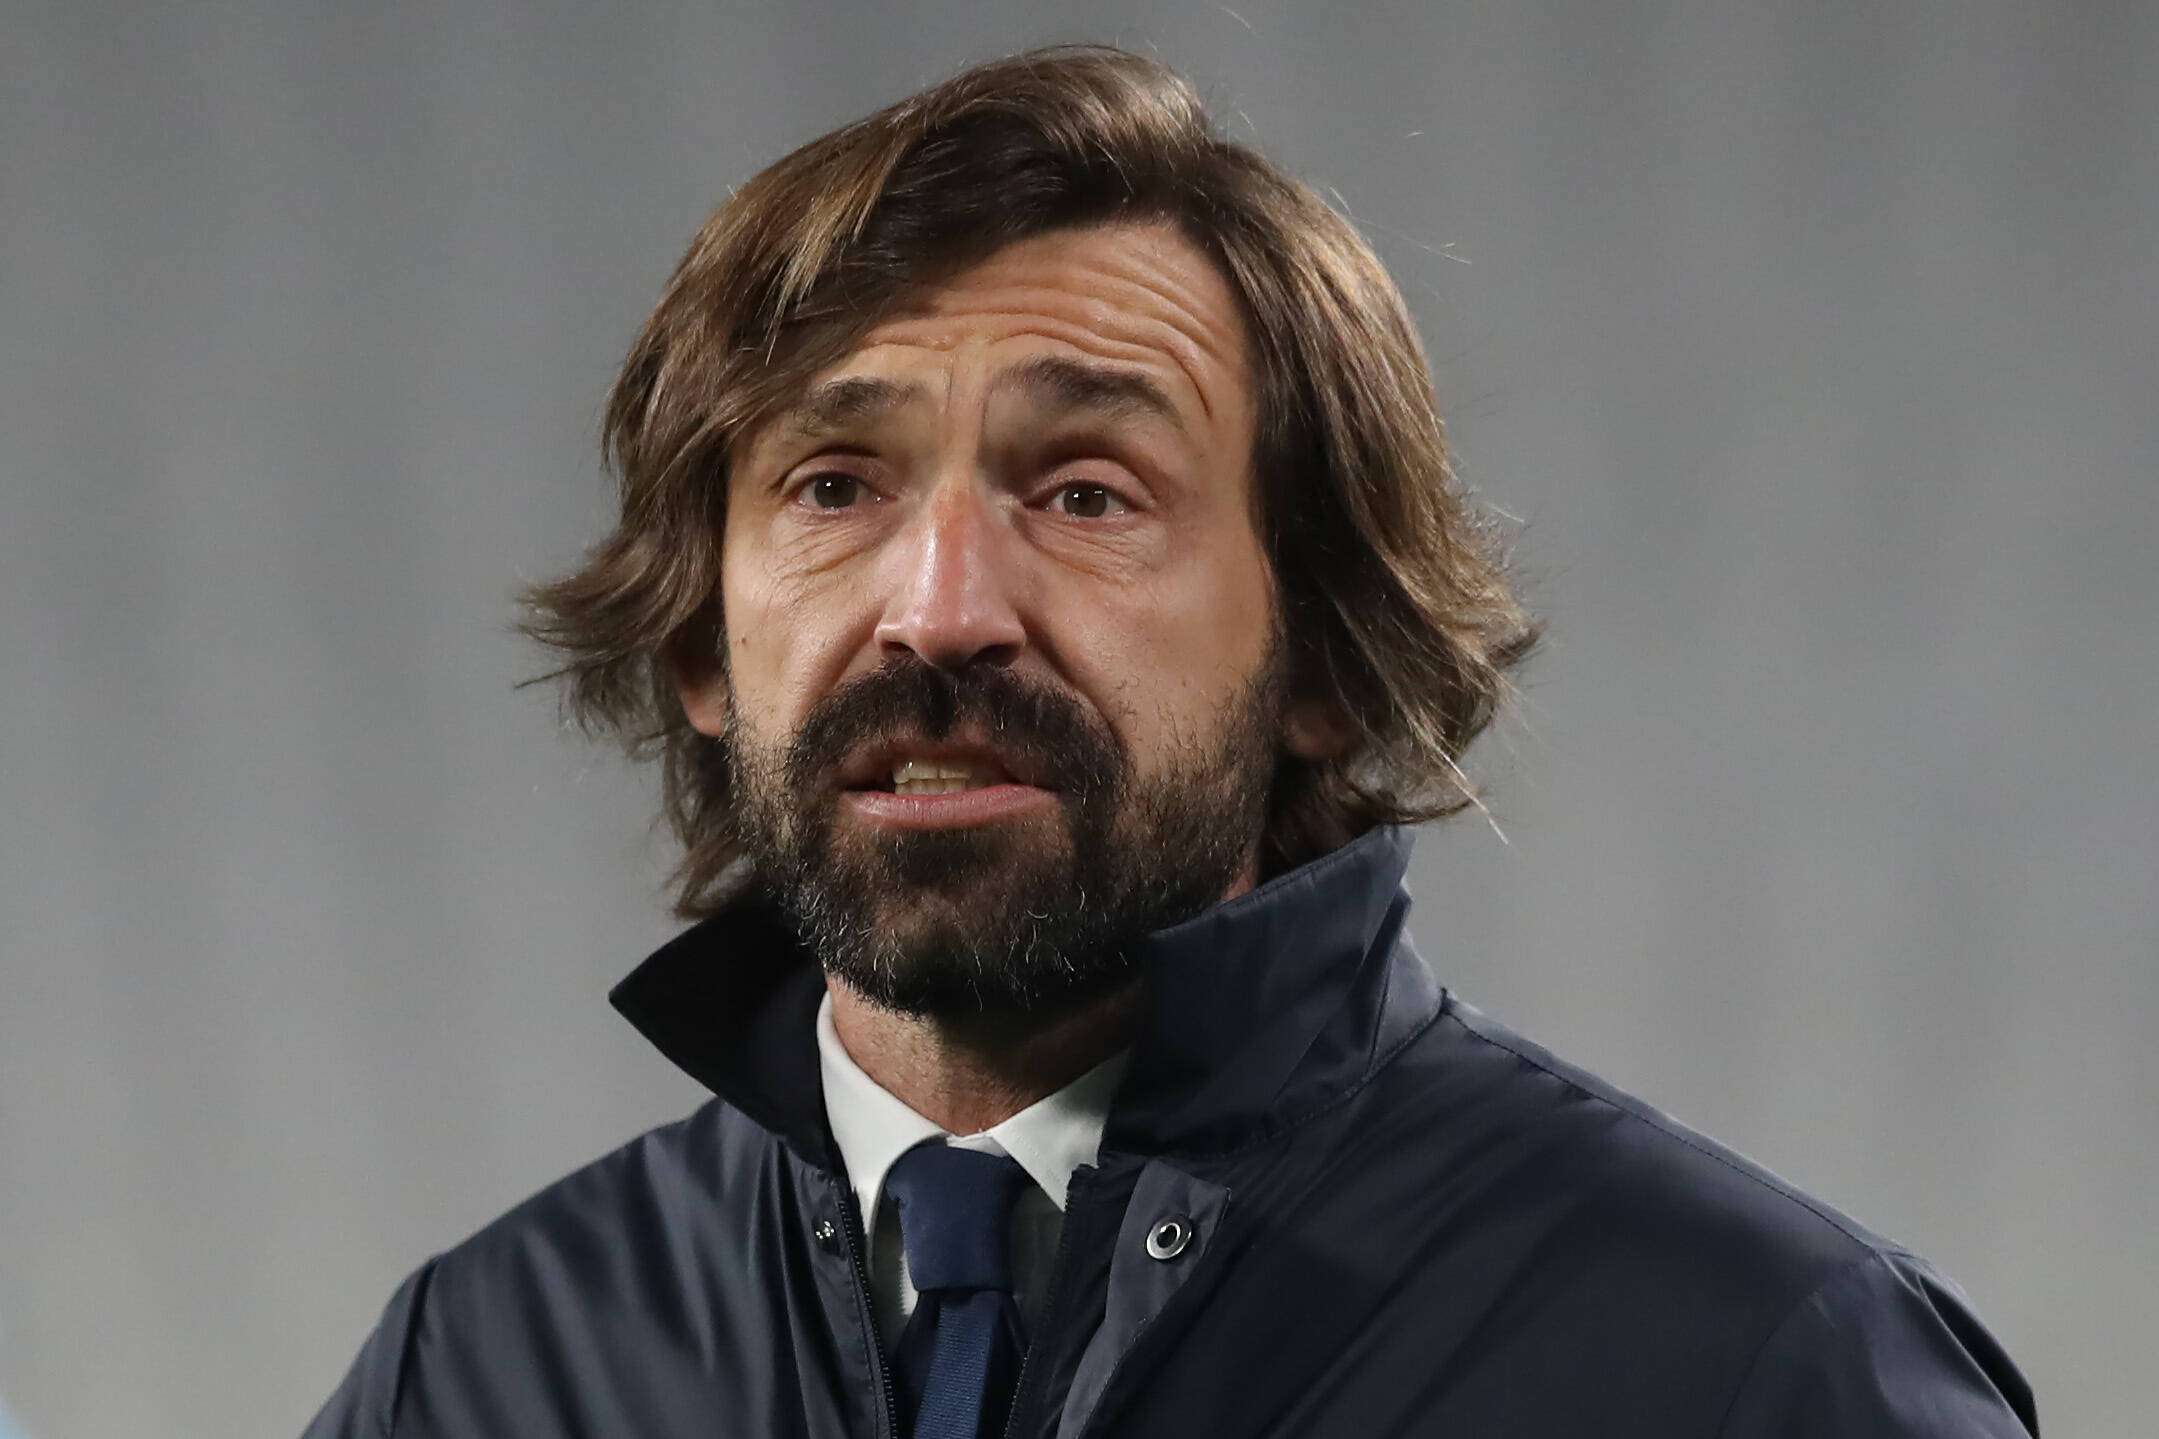 Barcelona eye Conte and Pirlo as new manager options - Get Italian ...